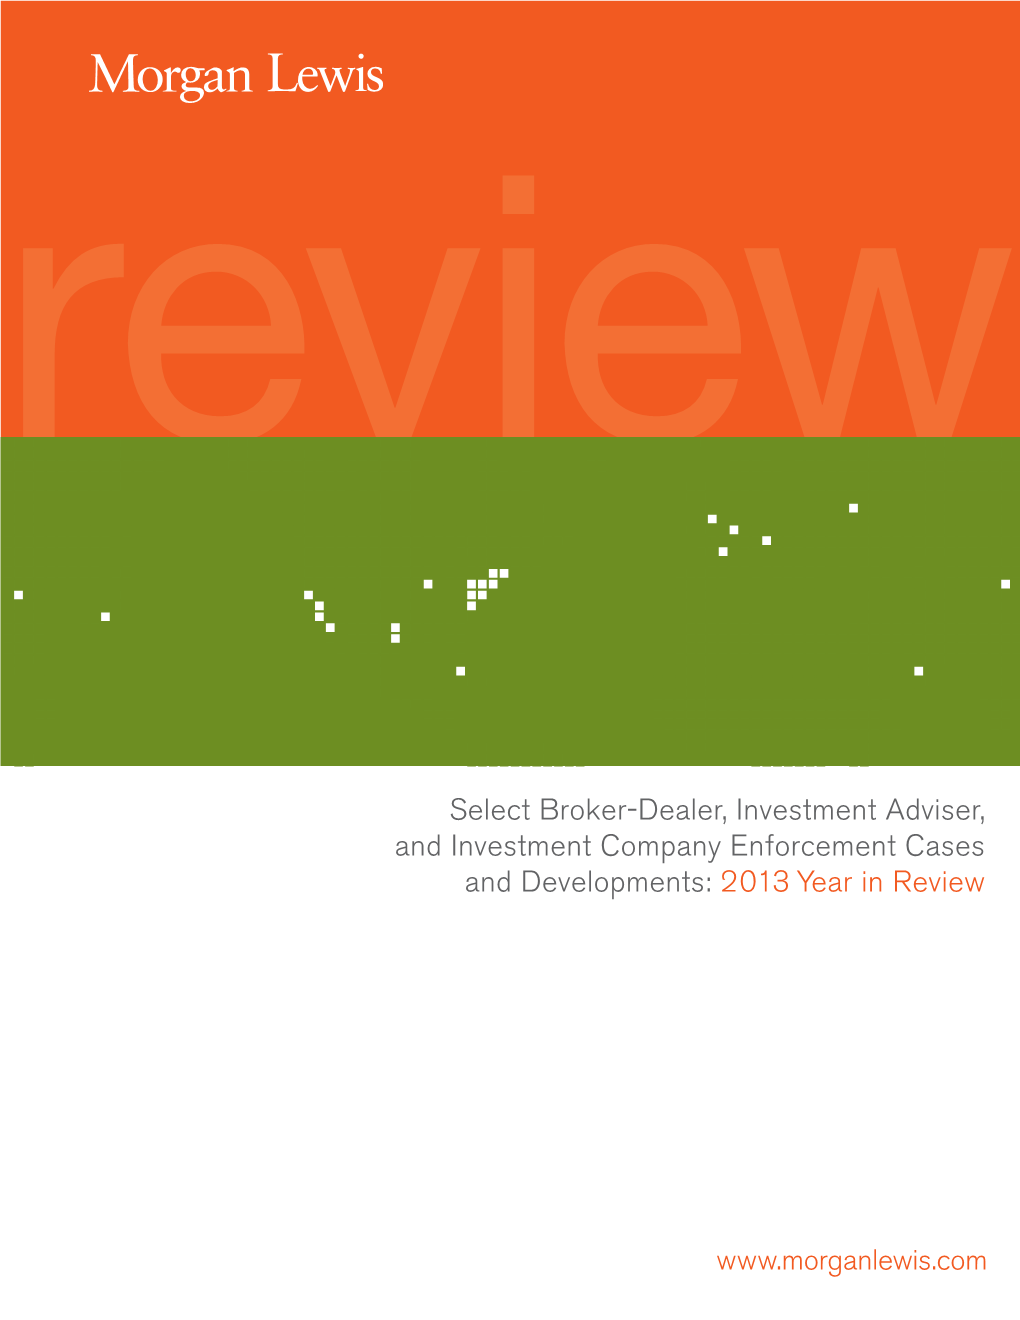 Select Broker-Dealer, Investment Adviser, and Investment Company Enforcement Cases and Developments: 2013 Year in Review